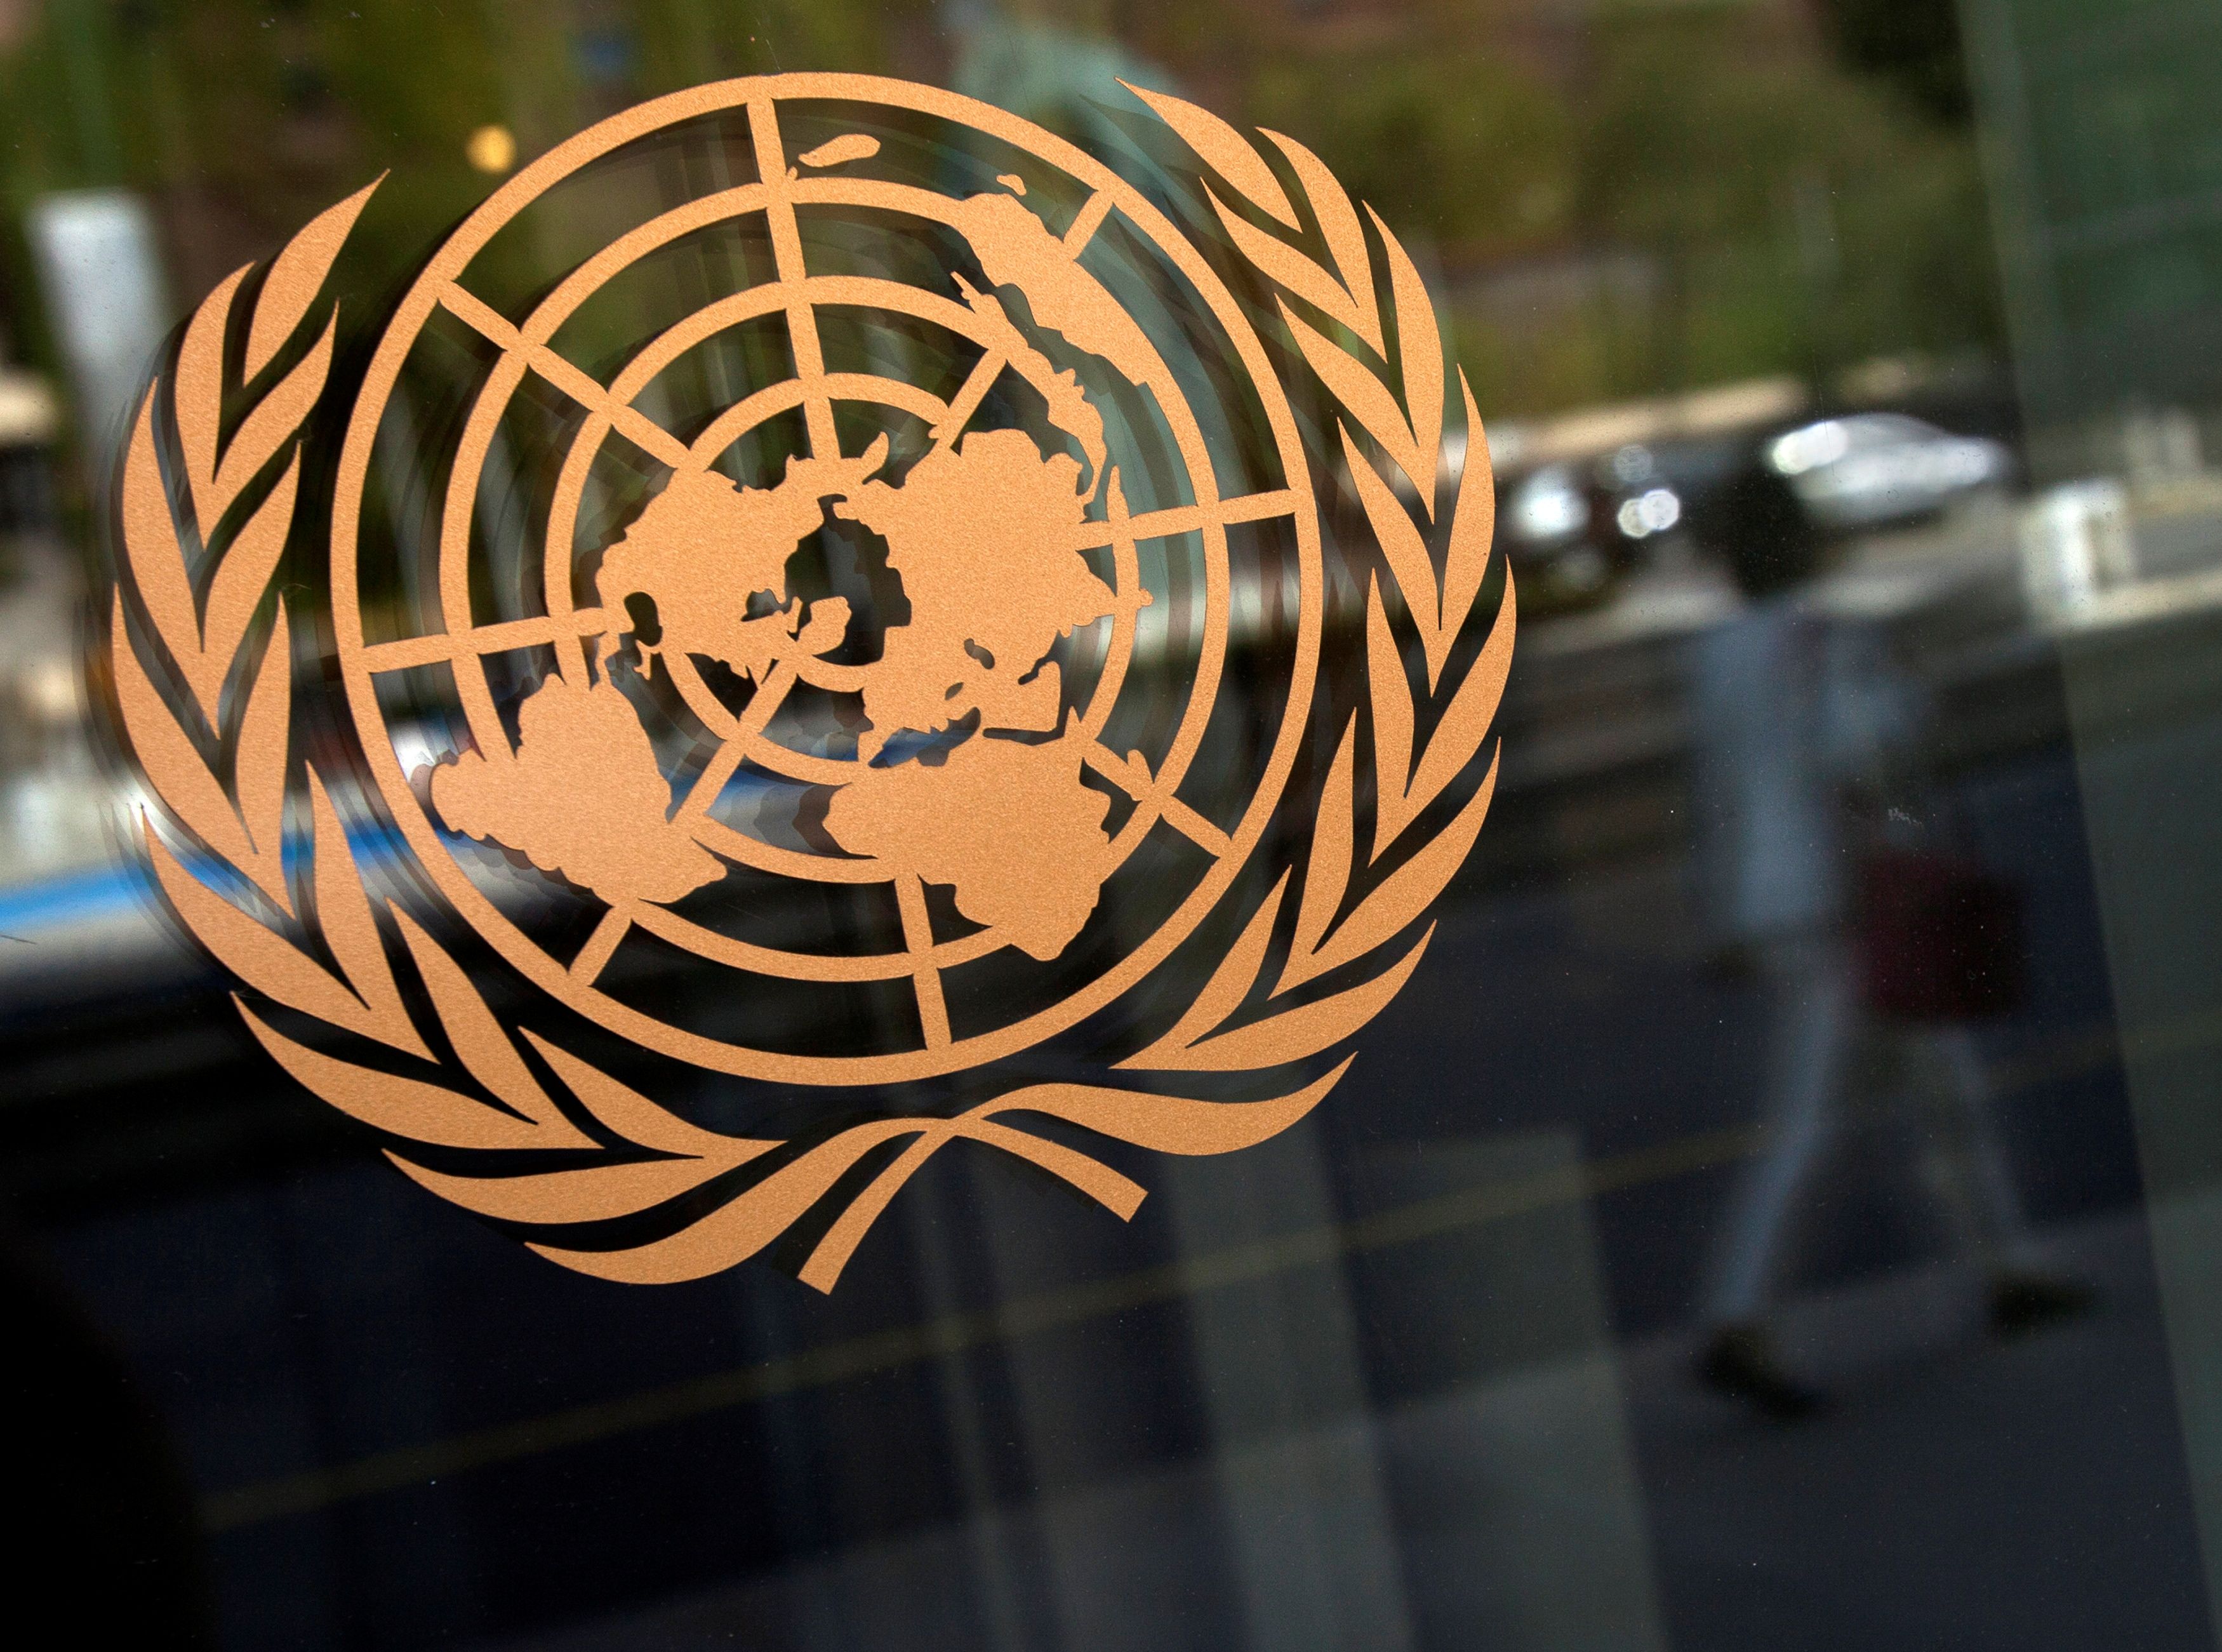 The logo of the United Nations is seen on the outside of the U.N. headquarters in New York